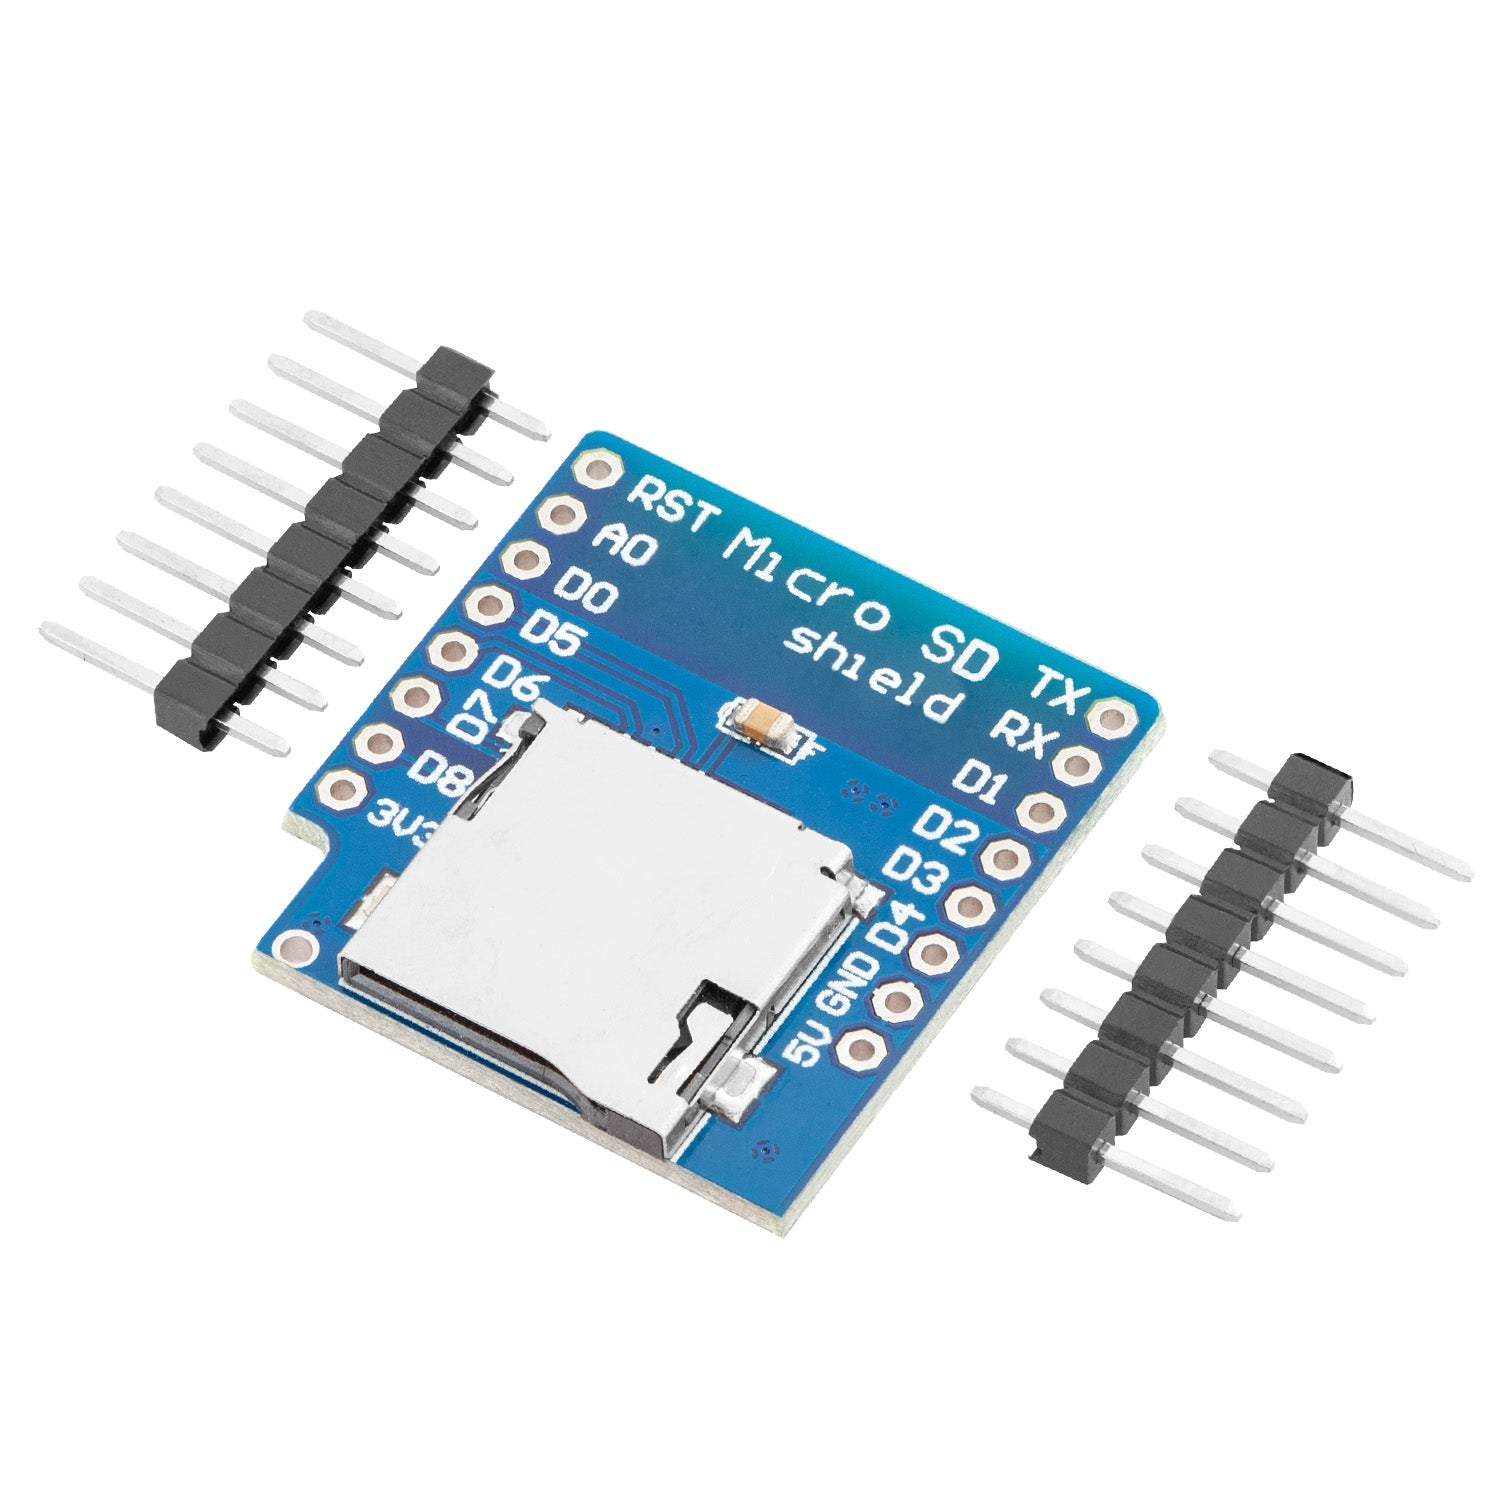 Micro SD Card Adapter D1 Mini Shield, 3.3V SD Card Module with SPI